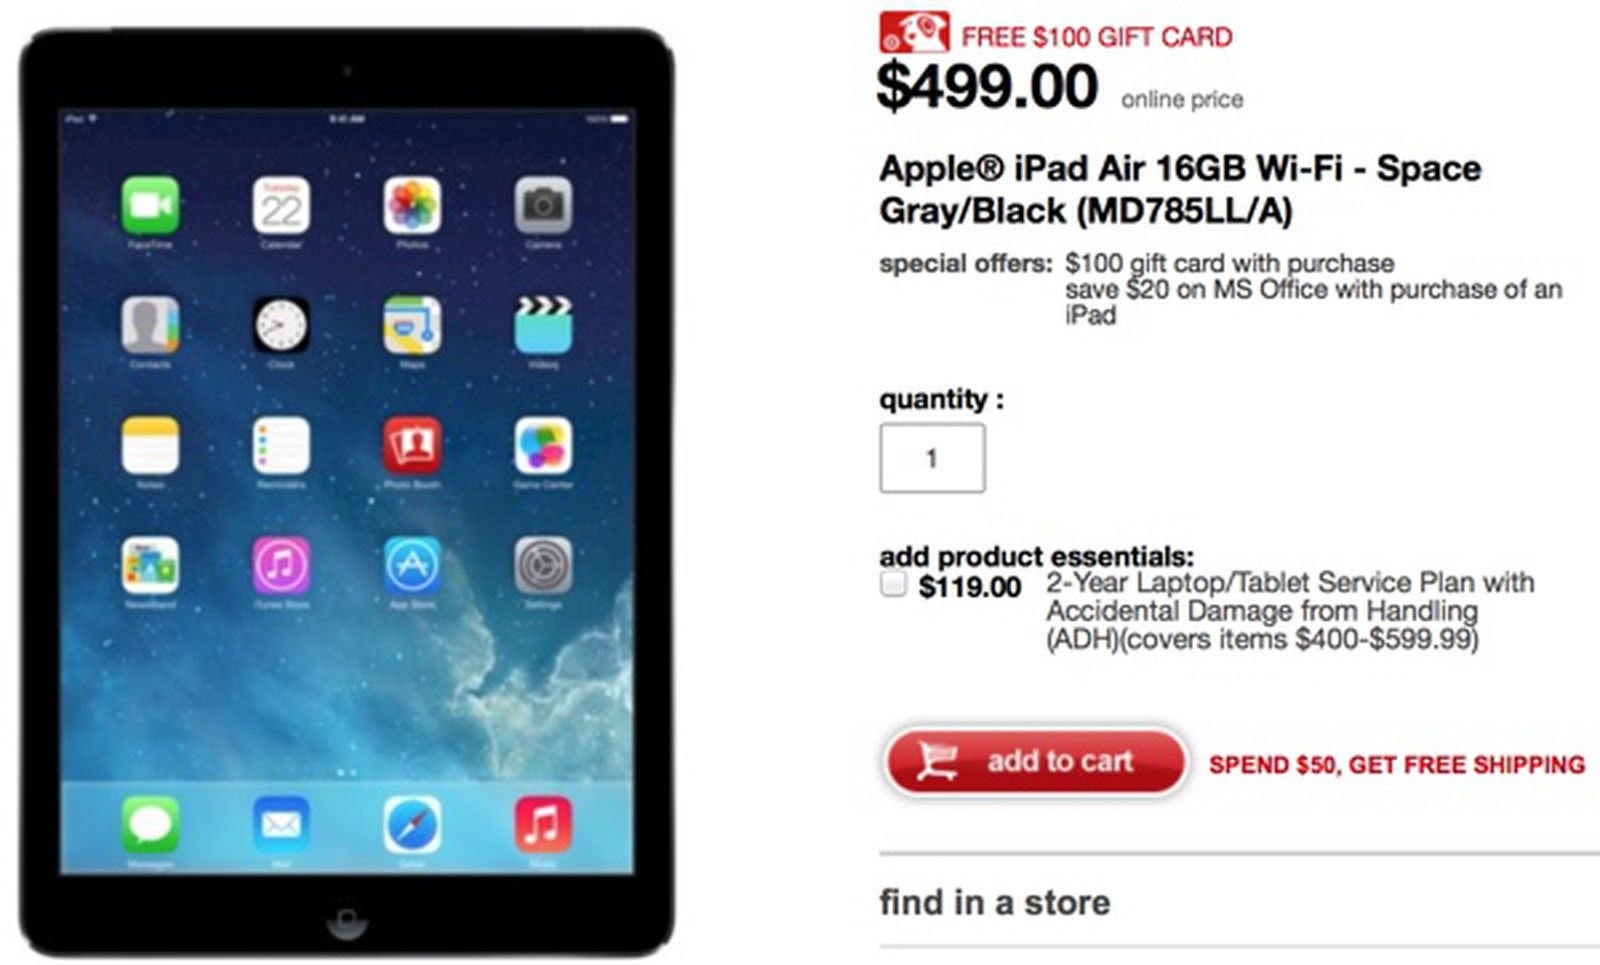 Target Offering Gift Cards Up to $100 With Purchase of iPad, iPhone, iPod Touch - MacRumors